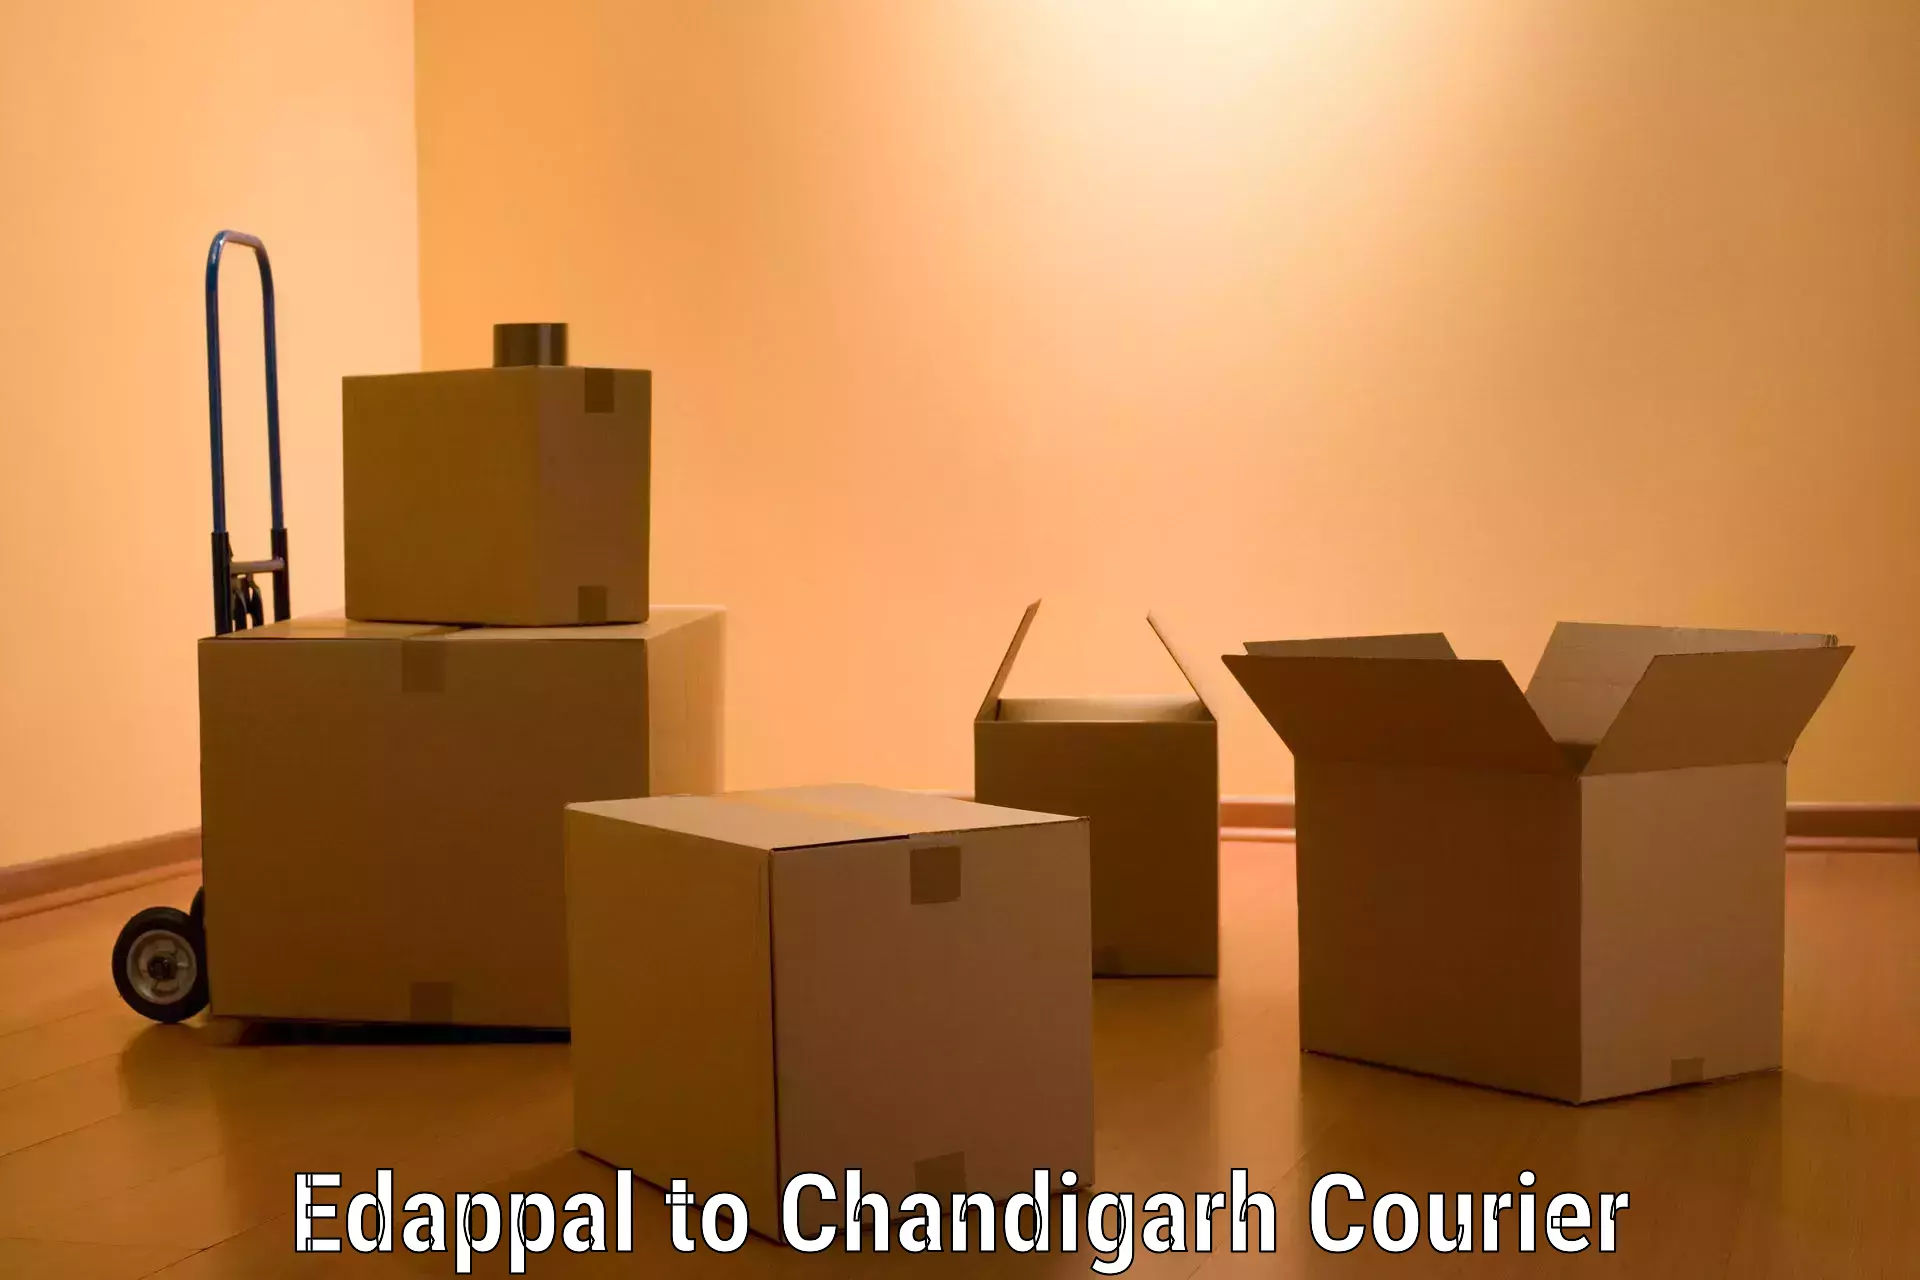 Trusted relocation experts Edappal to Chandigarh